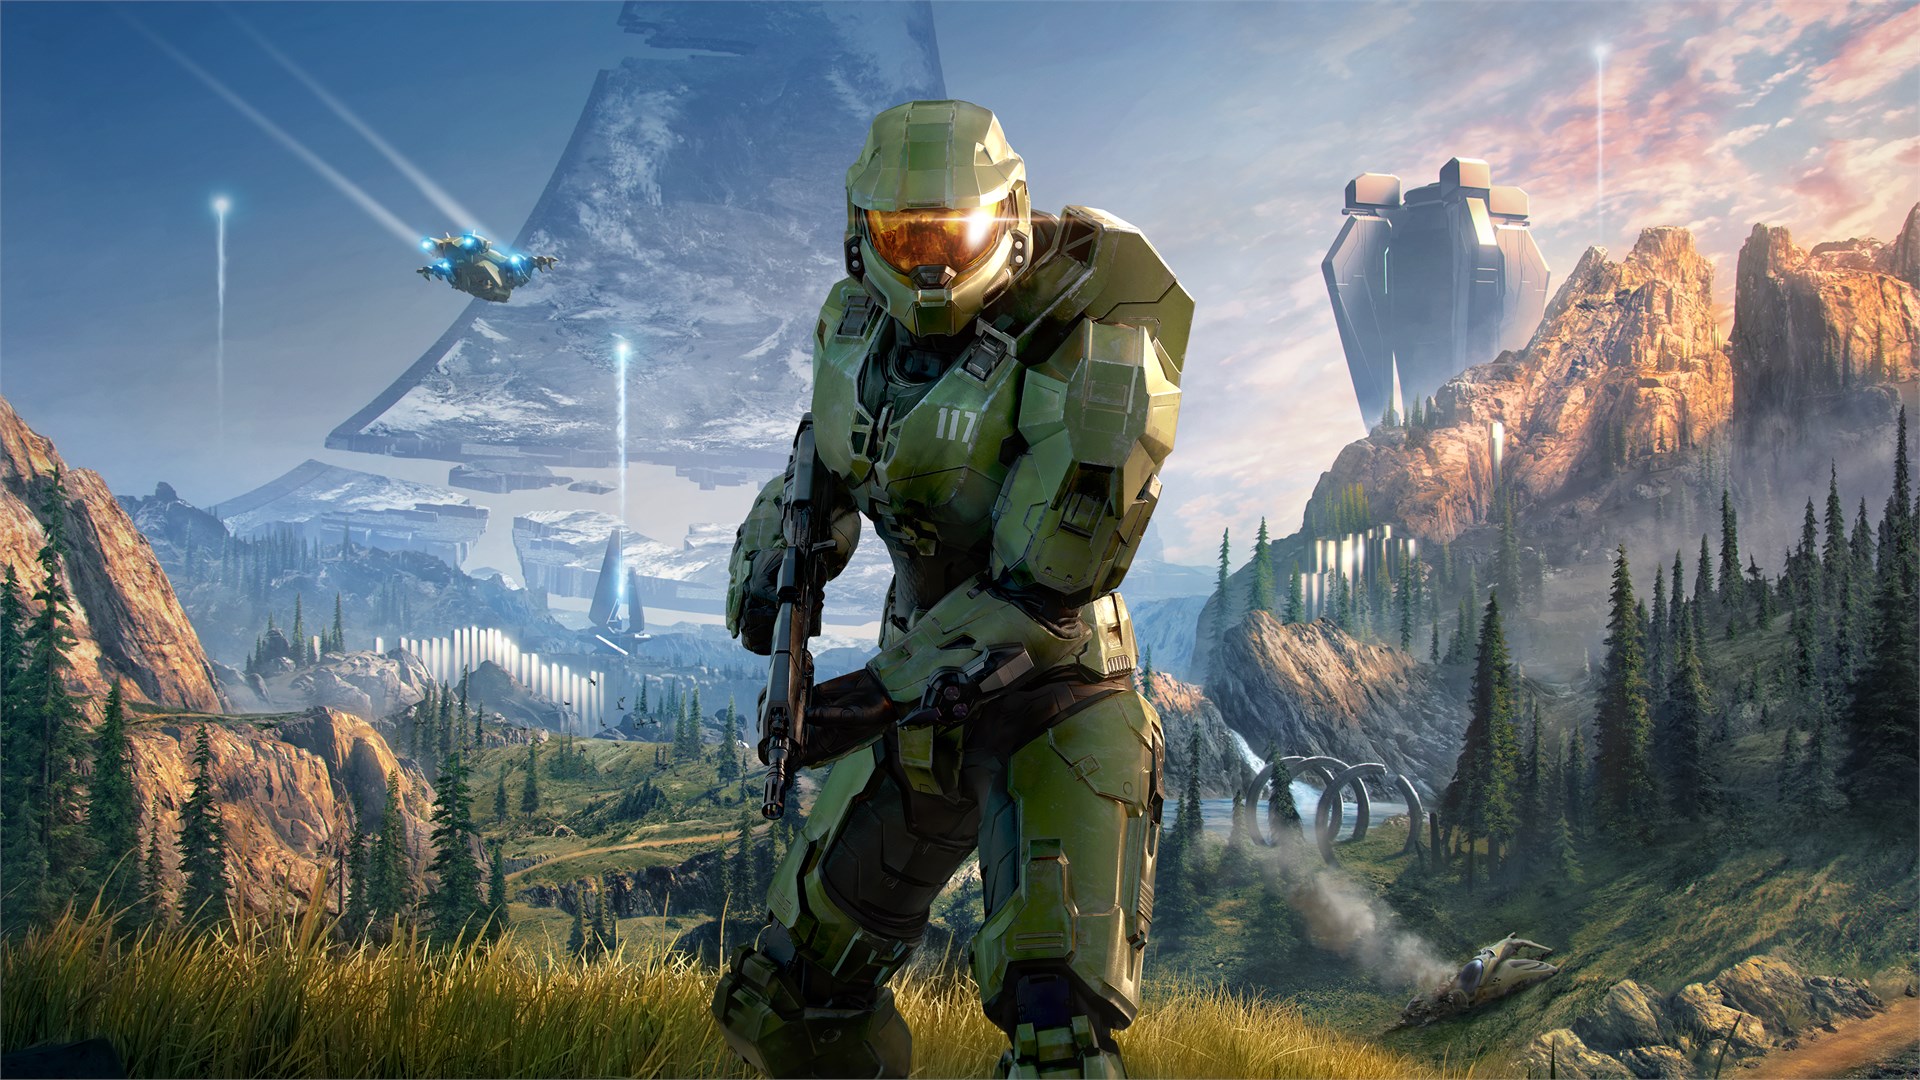 Video For Halo Infinite (Campaign) Is Now Available For PC, Xbox One, And Xbox Series X|S